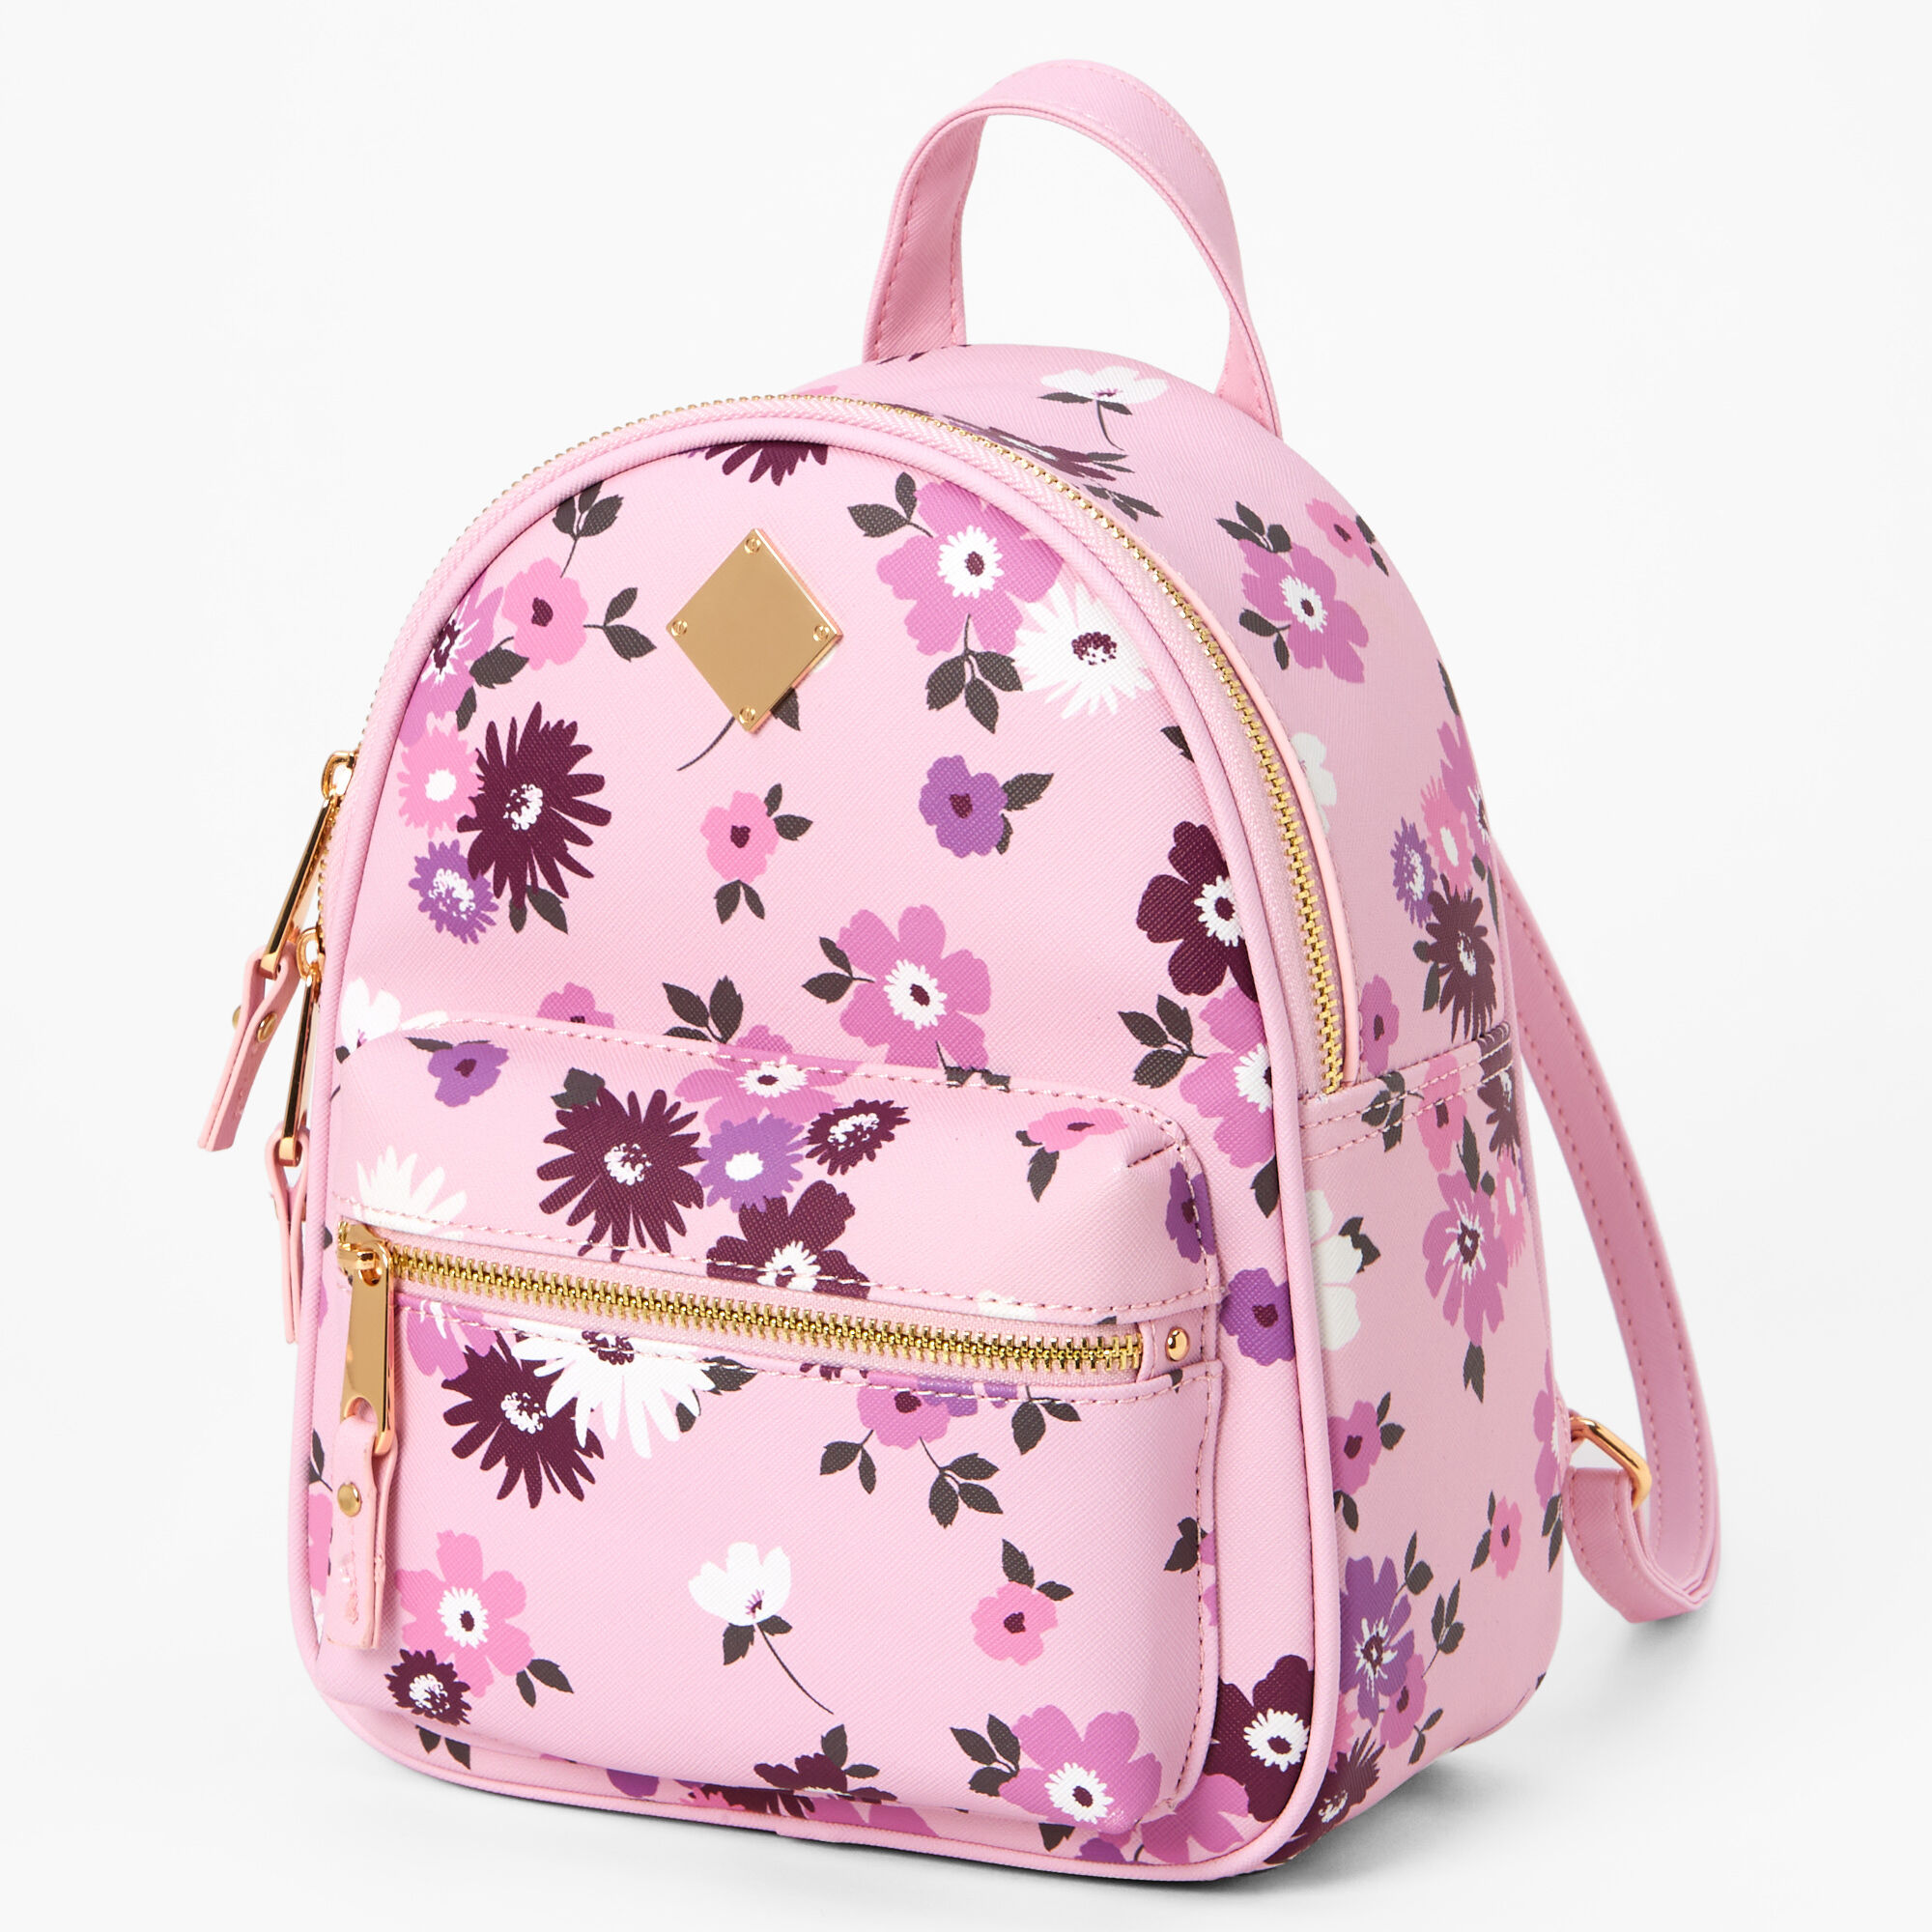 UNDER ONE SKY Floral Mini Backpack Cute Cottagecore Granny Kawaii Dusty  Lilac